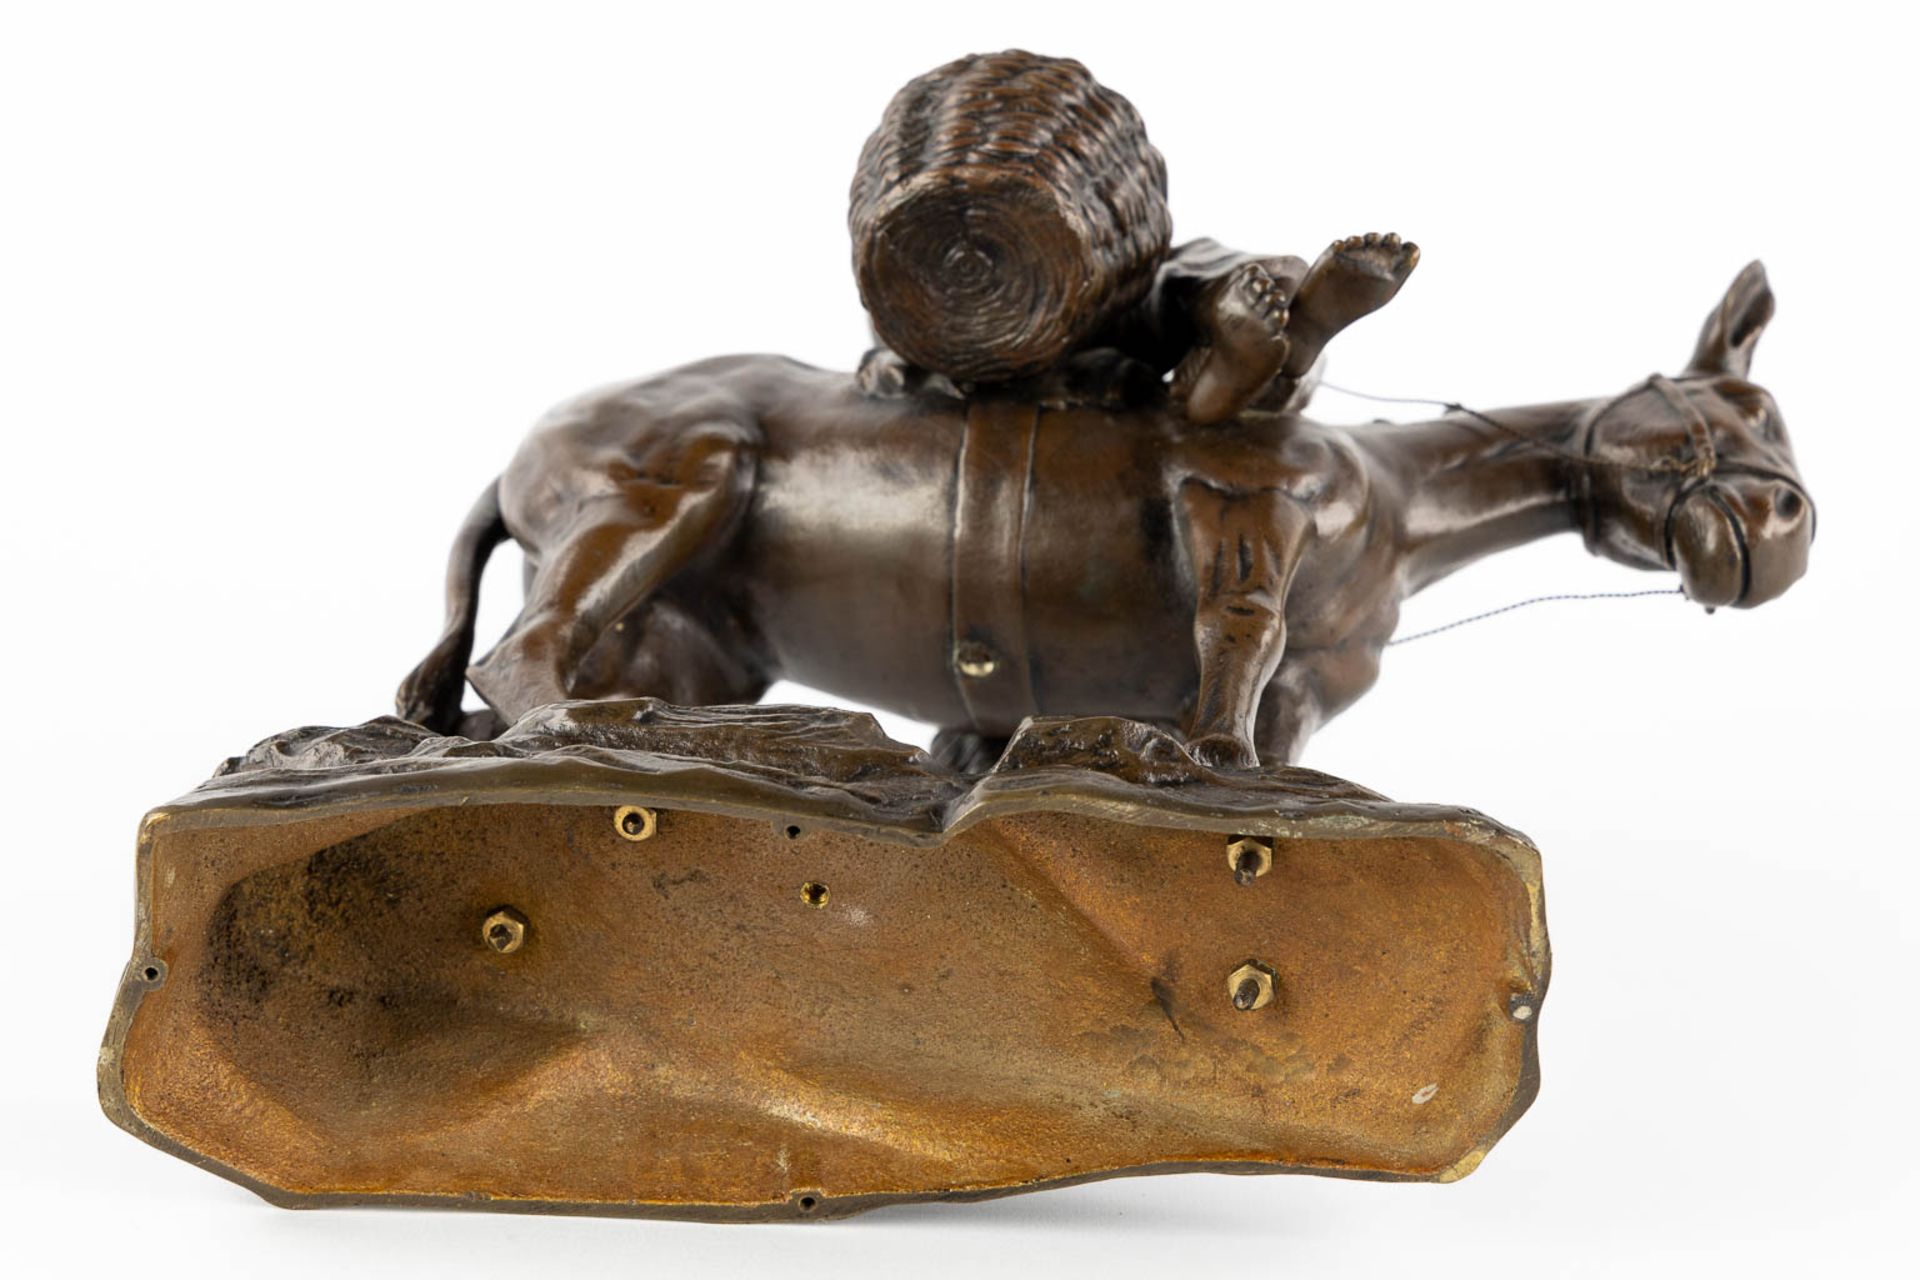 A small figurine of a young man riding a donkey, patinated bronze. Circa 1900. (L:18 x W:28 x H:33 c - Image 7 of 10